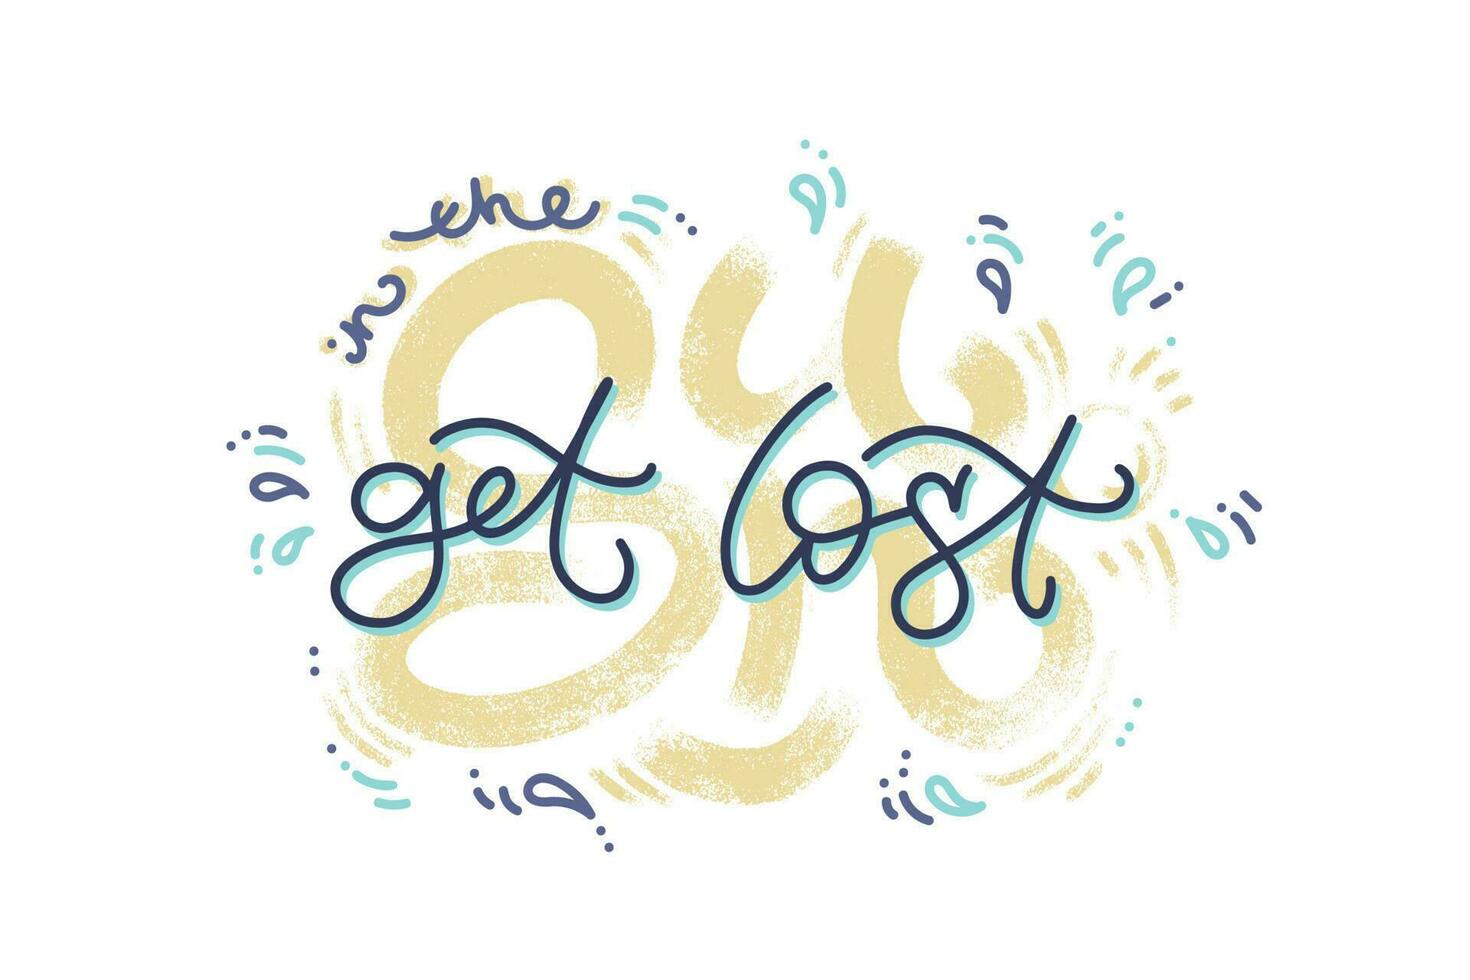 Get lost in the Sun hand drawn lettering composition in vector. Creative and unique lettering quotes for the hot summer season. Vector illustration. For cards, posters, banners.